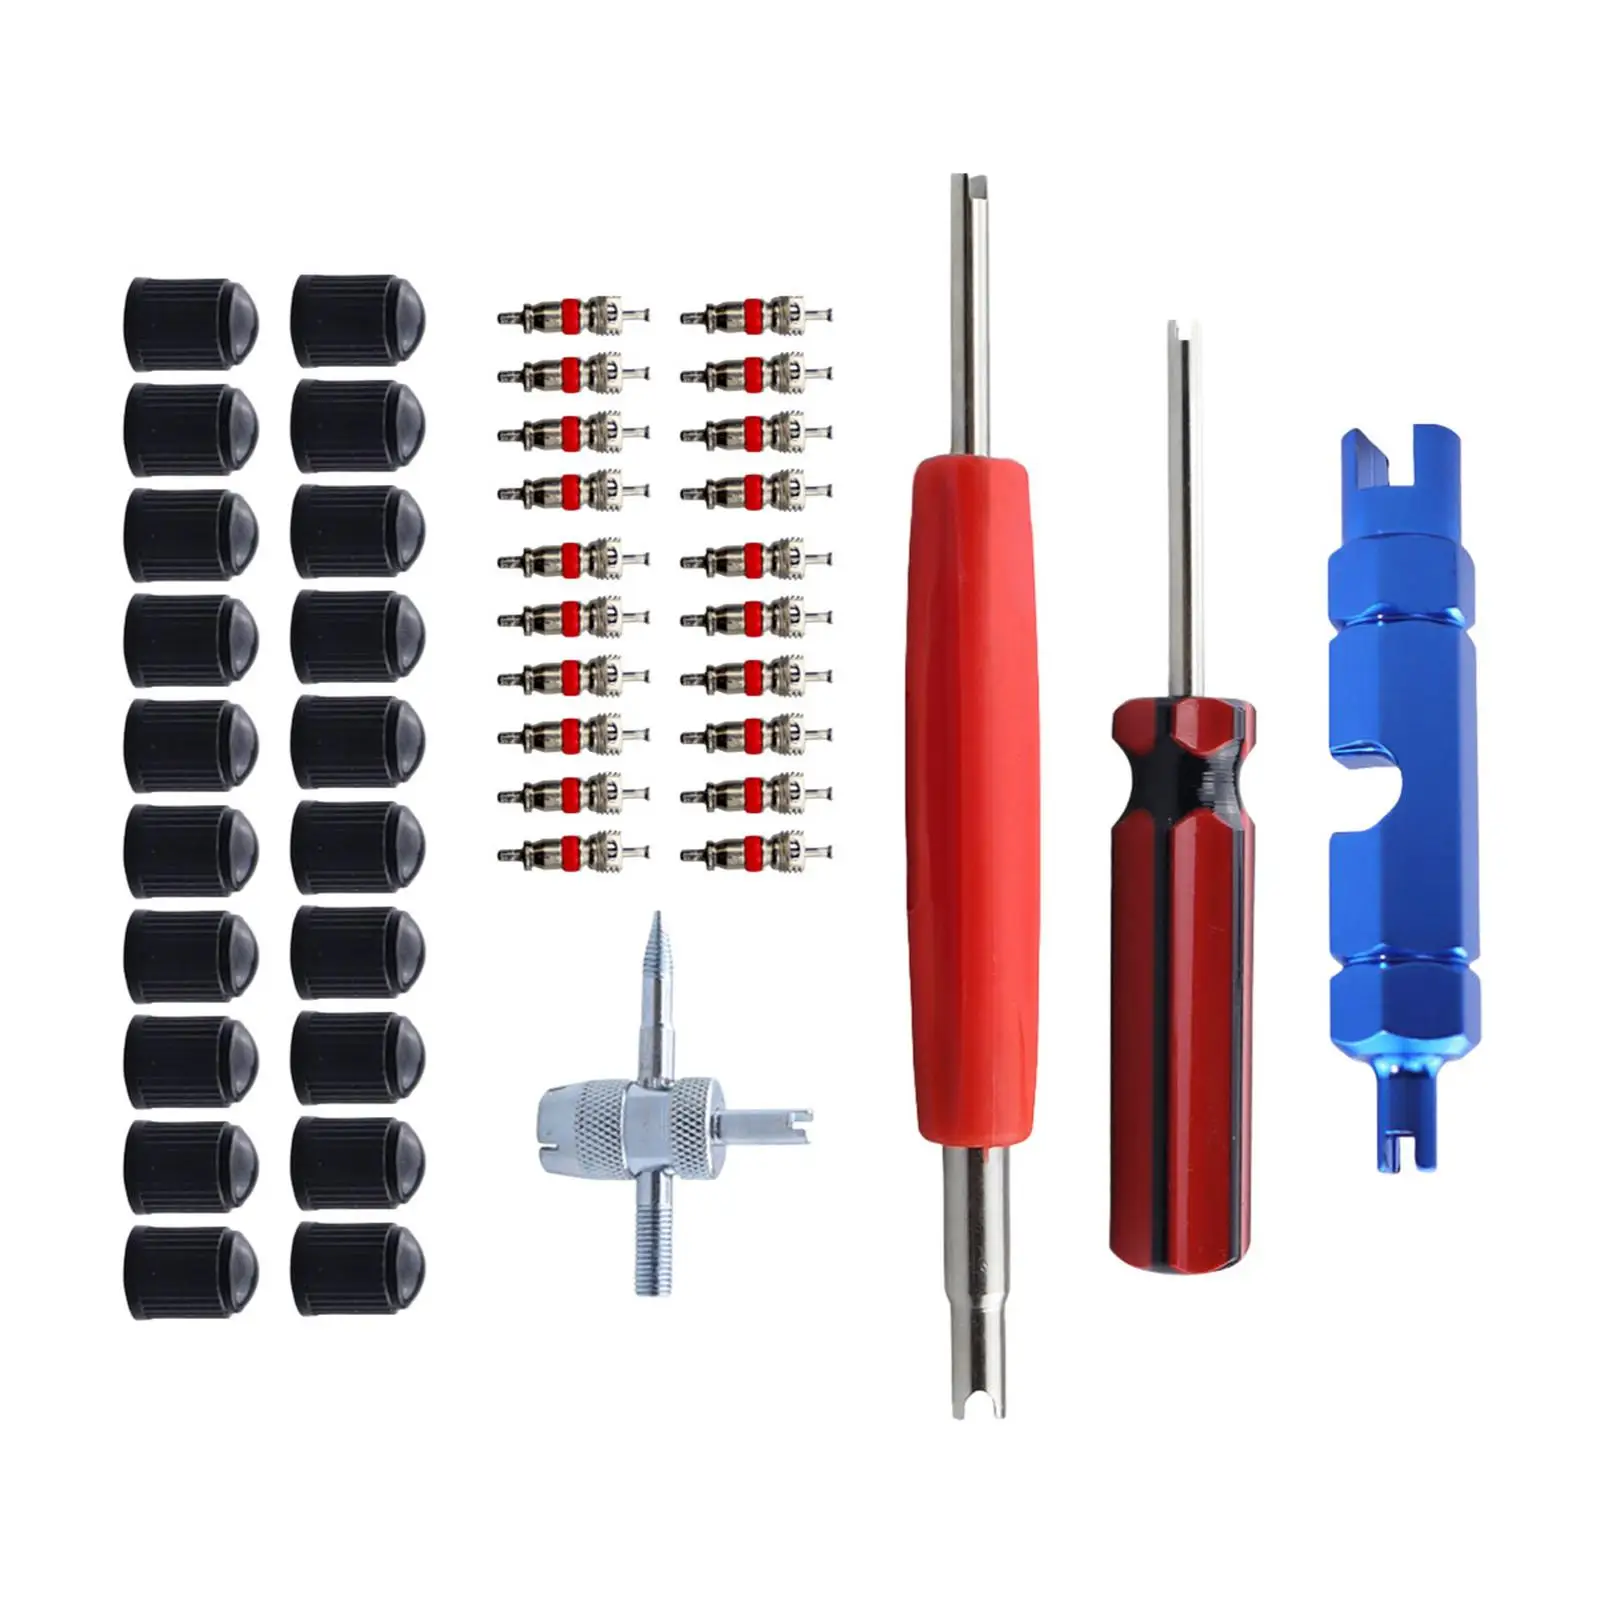 Valve Stem Removal Tool Valve Stem Caps Car Accessories Valve Core Remover Tool for Bicycle Motorcycle Truck Bike Auto